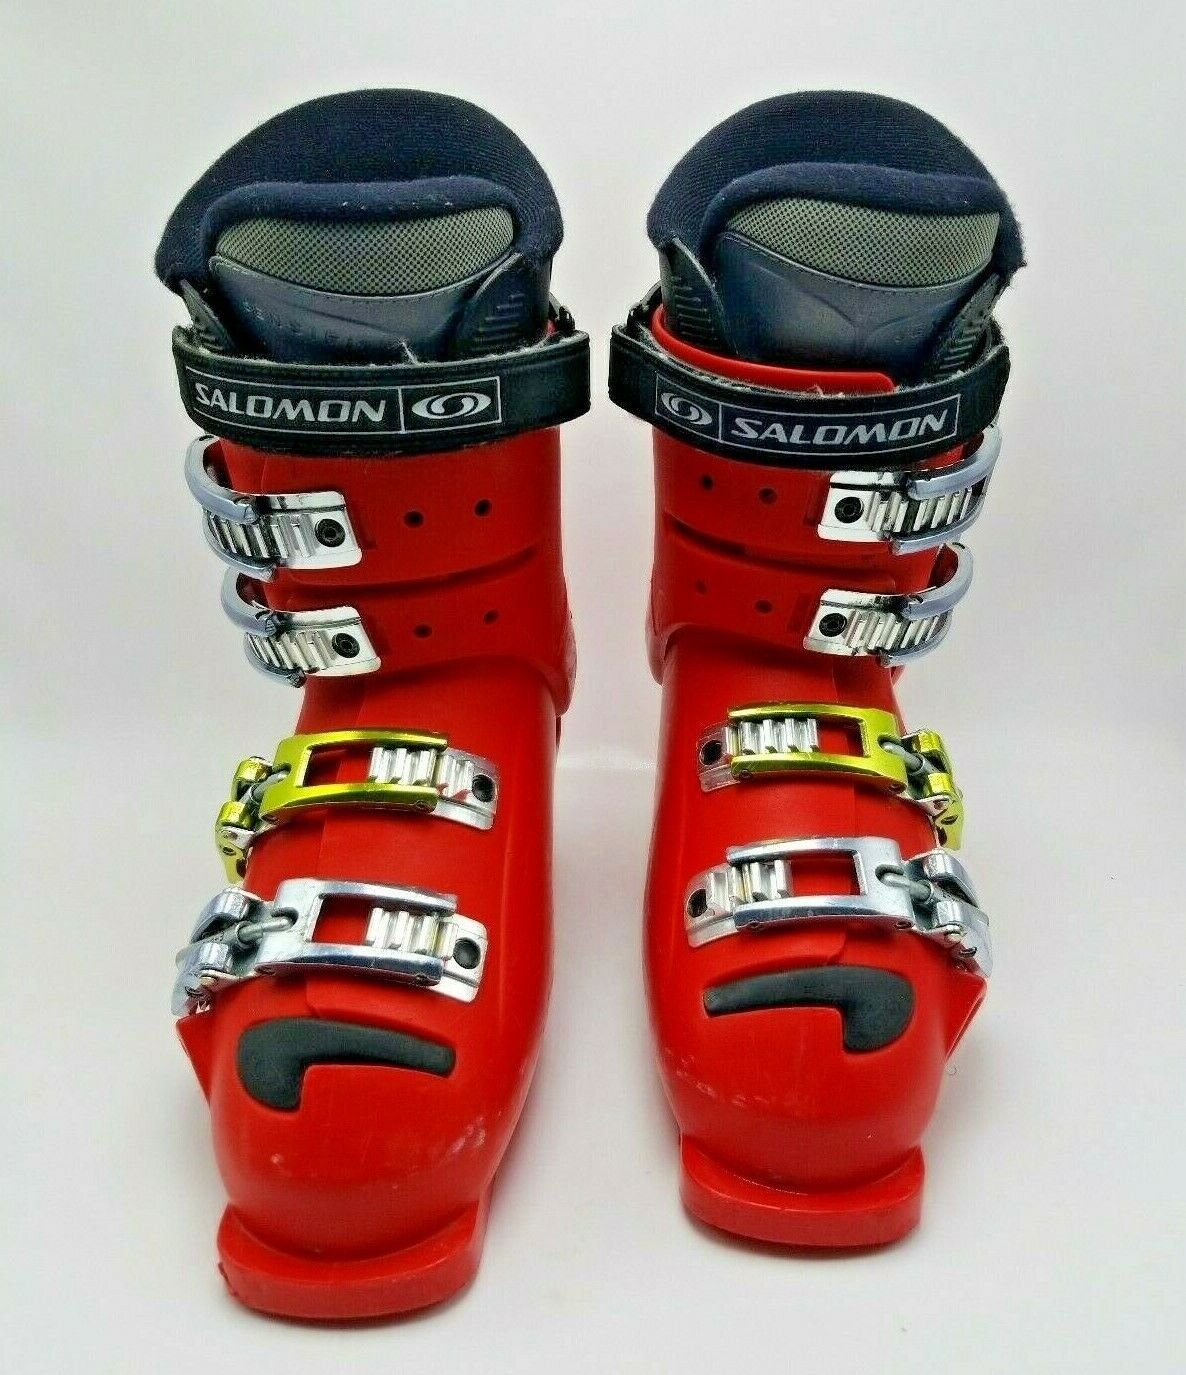 Buy Online High Quality Salomon Snowboard Boots Mens US 5 Go Red Carbonlink Course T Flex RED Ski Boots - My Neighbor's Stuff LLC